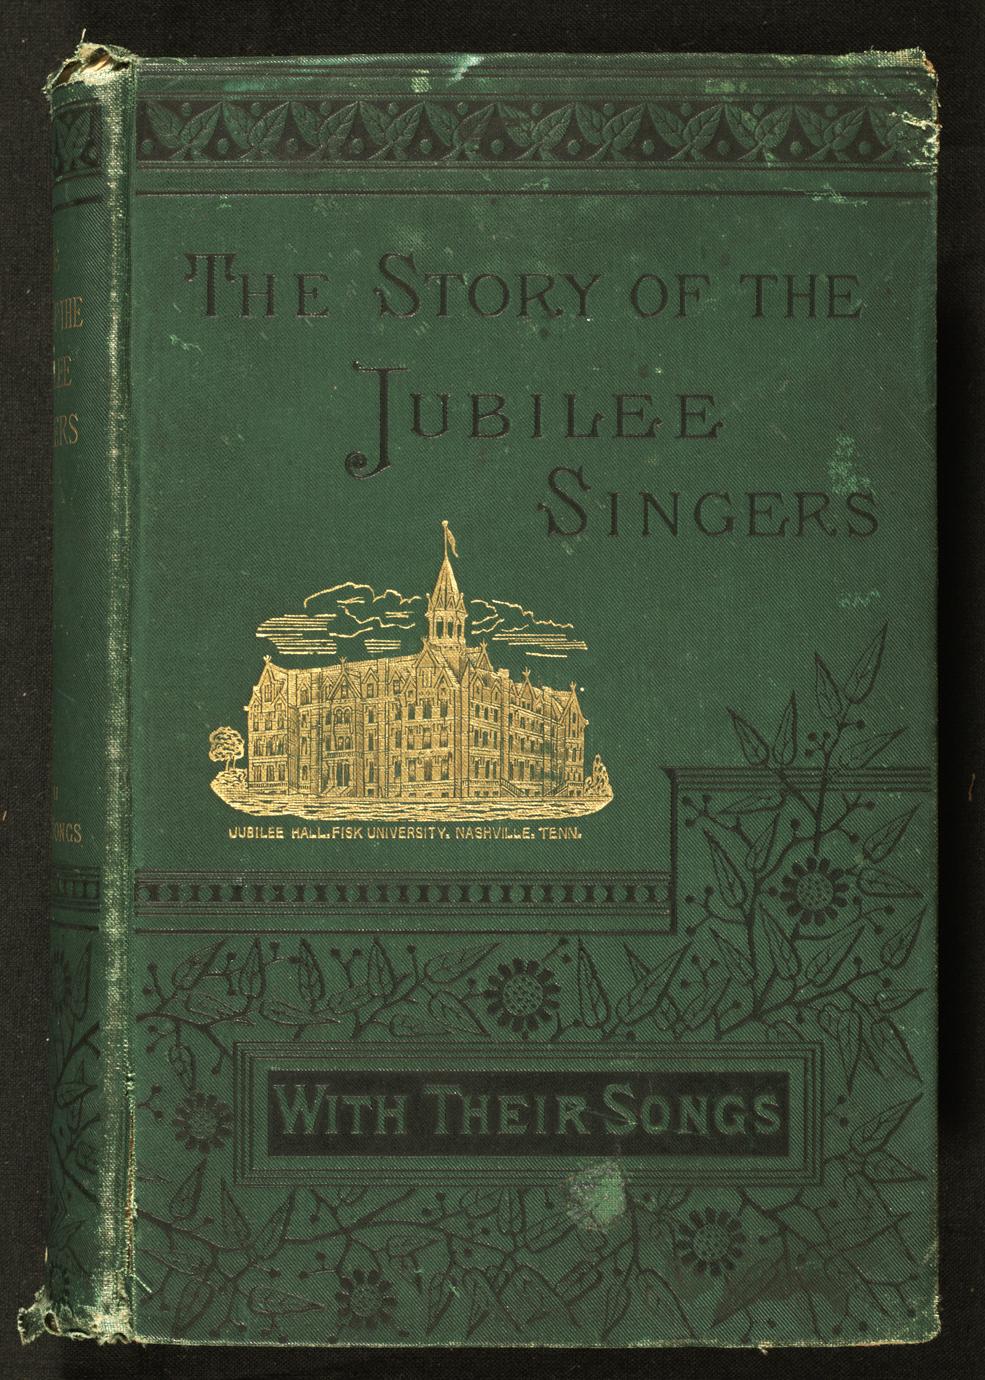 Story of the Jubilee Singers : with their songs (1 of 3)